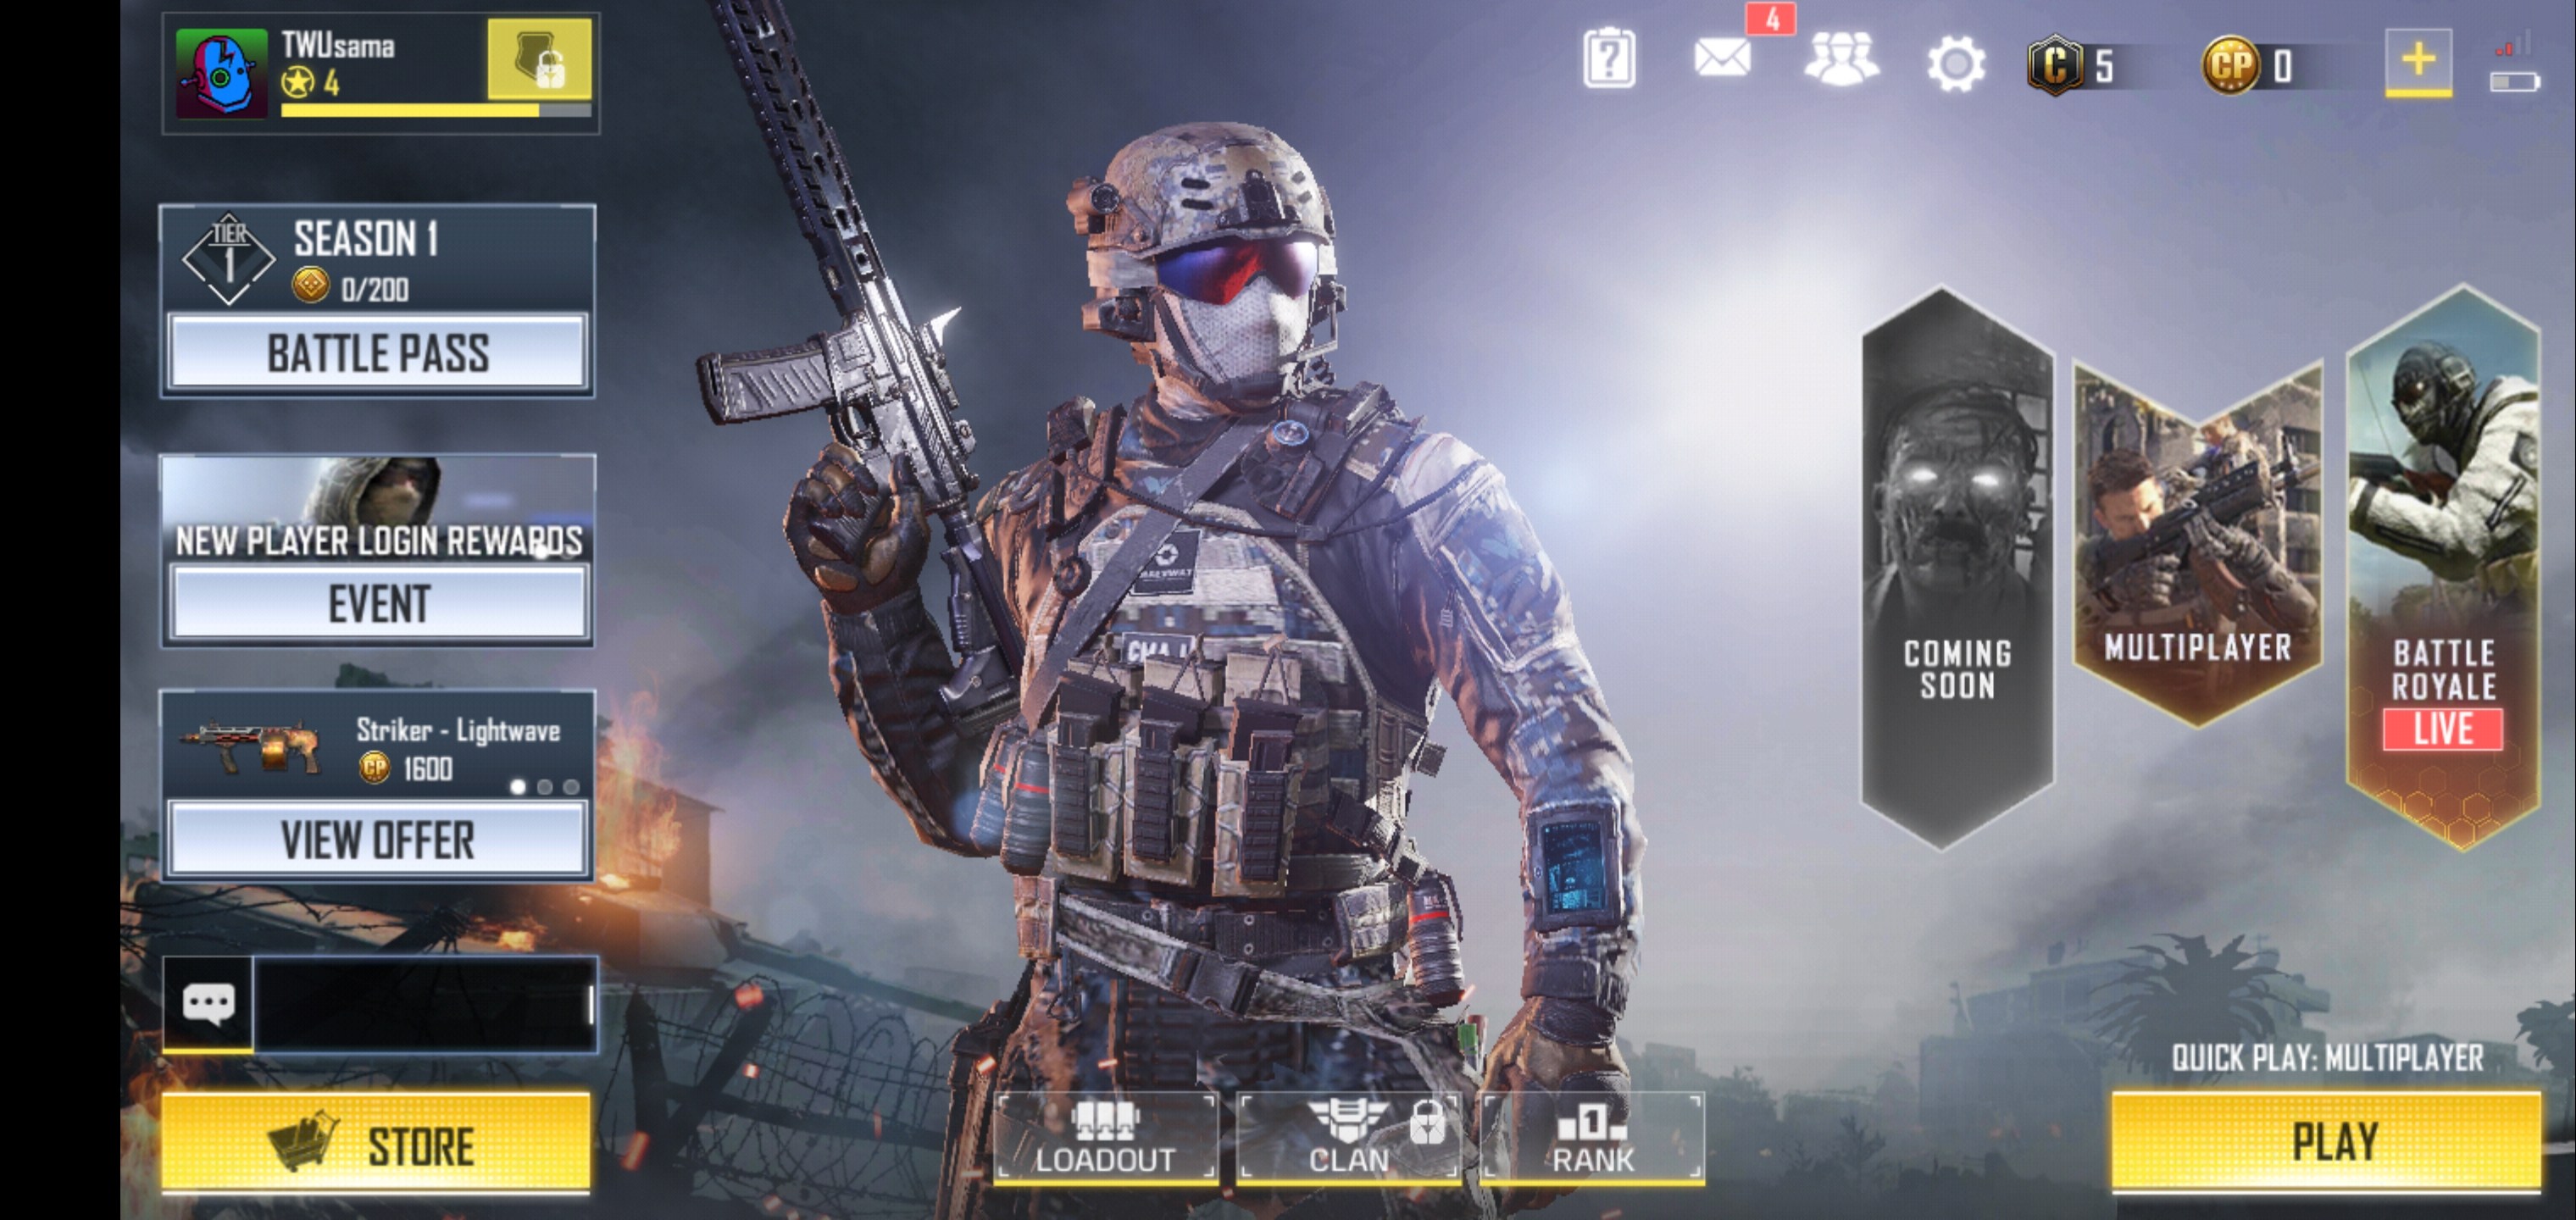 Download Call of Duty Mobile APK